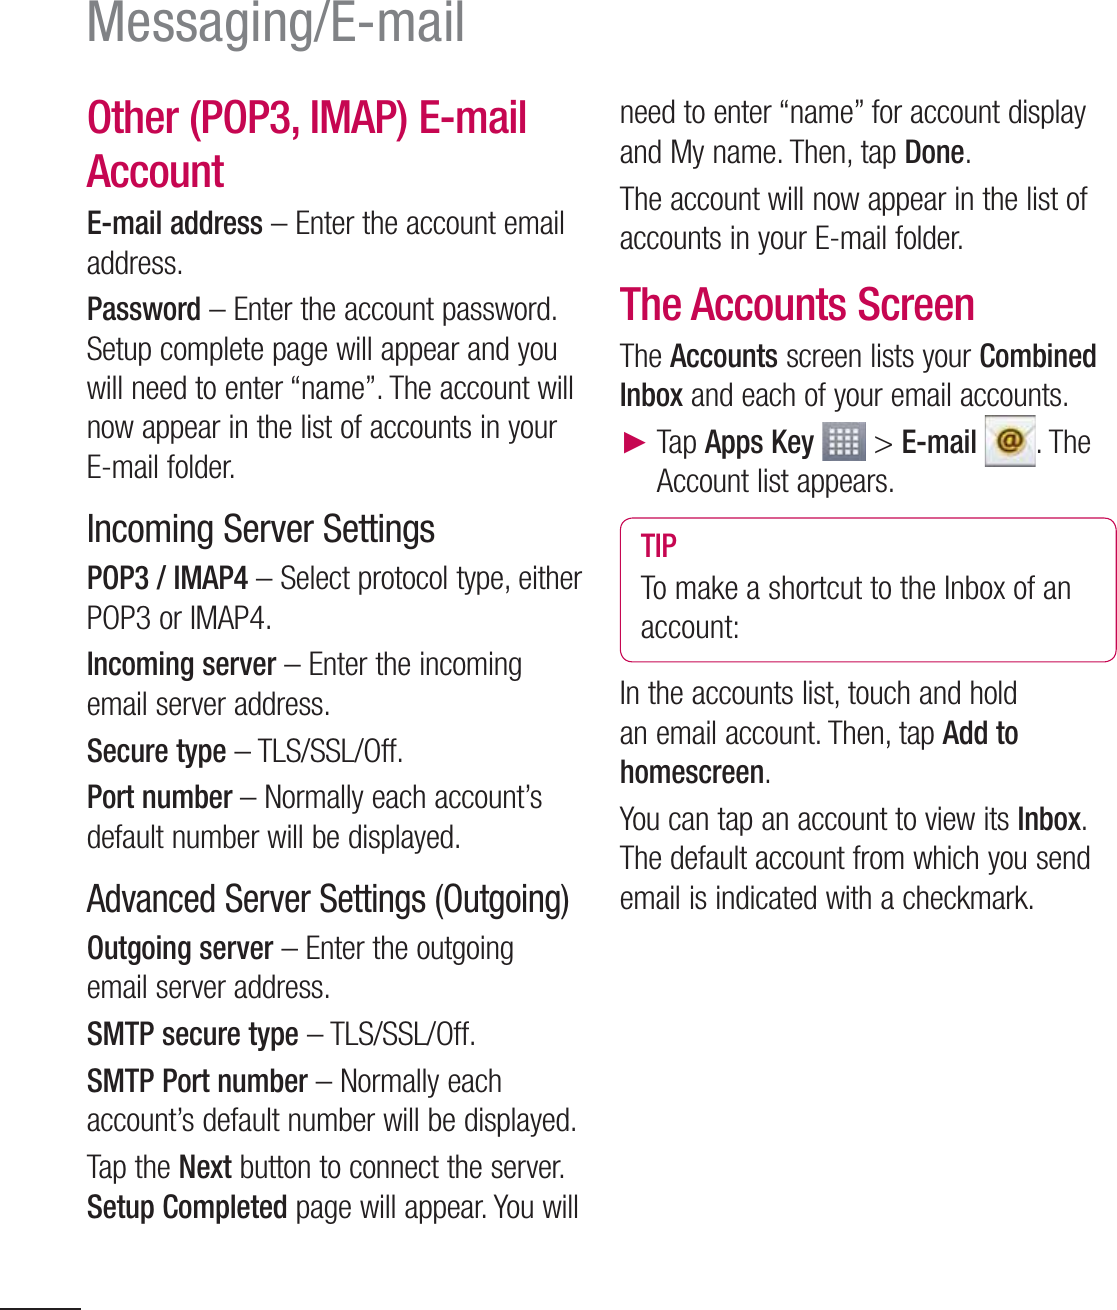 62Messaging/E-mailOther (POP3, IMAP) E-mail Account E-mail address – Enter the account email address.Password – Enter the account password. Setup complete page will appear and you will need to enter “name”. The account will now appear in the list of accounts in your E-mail folder.Incoming Server SettingsPOP3 / IMAP4 – Select protocol type, either POP3 or IMAP4.Incoming server – Enter the incoming email server address.Secure type – TLS/SSL/Off.Port number – Normally each account’s default number will be displayed.Advanced Server Settings (Outgoing)Outgoing server – Enter the outgoing email server address.SMTP secure type – TLS/SSL/Off.SMTP Port number – Normally each account’s default number will be displayed.Tap the Next button to connect the server. Setup Completed page will appear. You will need to enter “name” for account display and My name. Then, tap Done. The account will now appear in the list of accounts in your E-mail folder.The Accounts ScreenThe Accounts screen lists your Combined Inbox and each of your email accounts.  Tap Apps Key  &gt; E-mail . The Account list appears.TIPTo make a shortcut to the Inbox of an account:In the accounts list, touch and hold an email account. Then, tap Add to homescreen.You can tap an account to view its Inbox. The default account from which you send email is indicated with a checkmark.